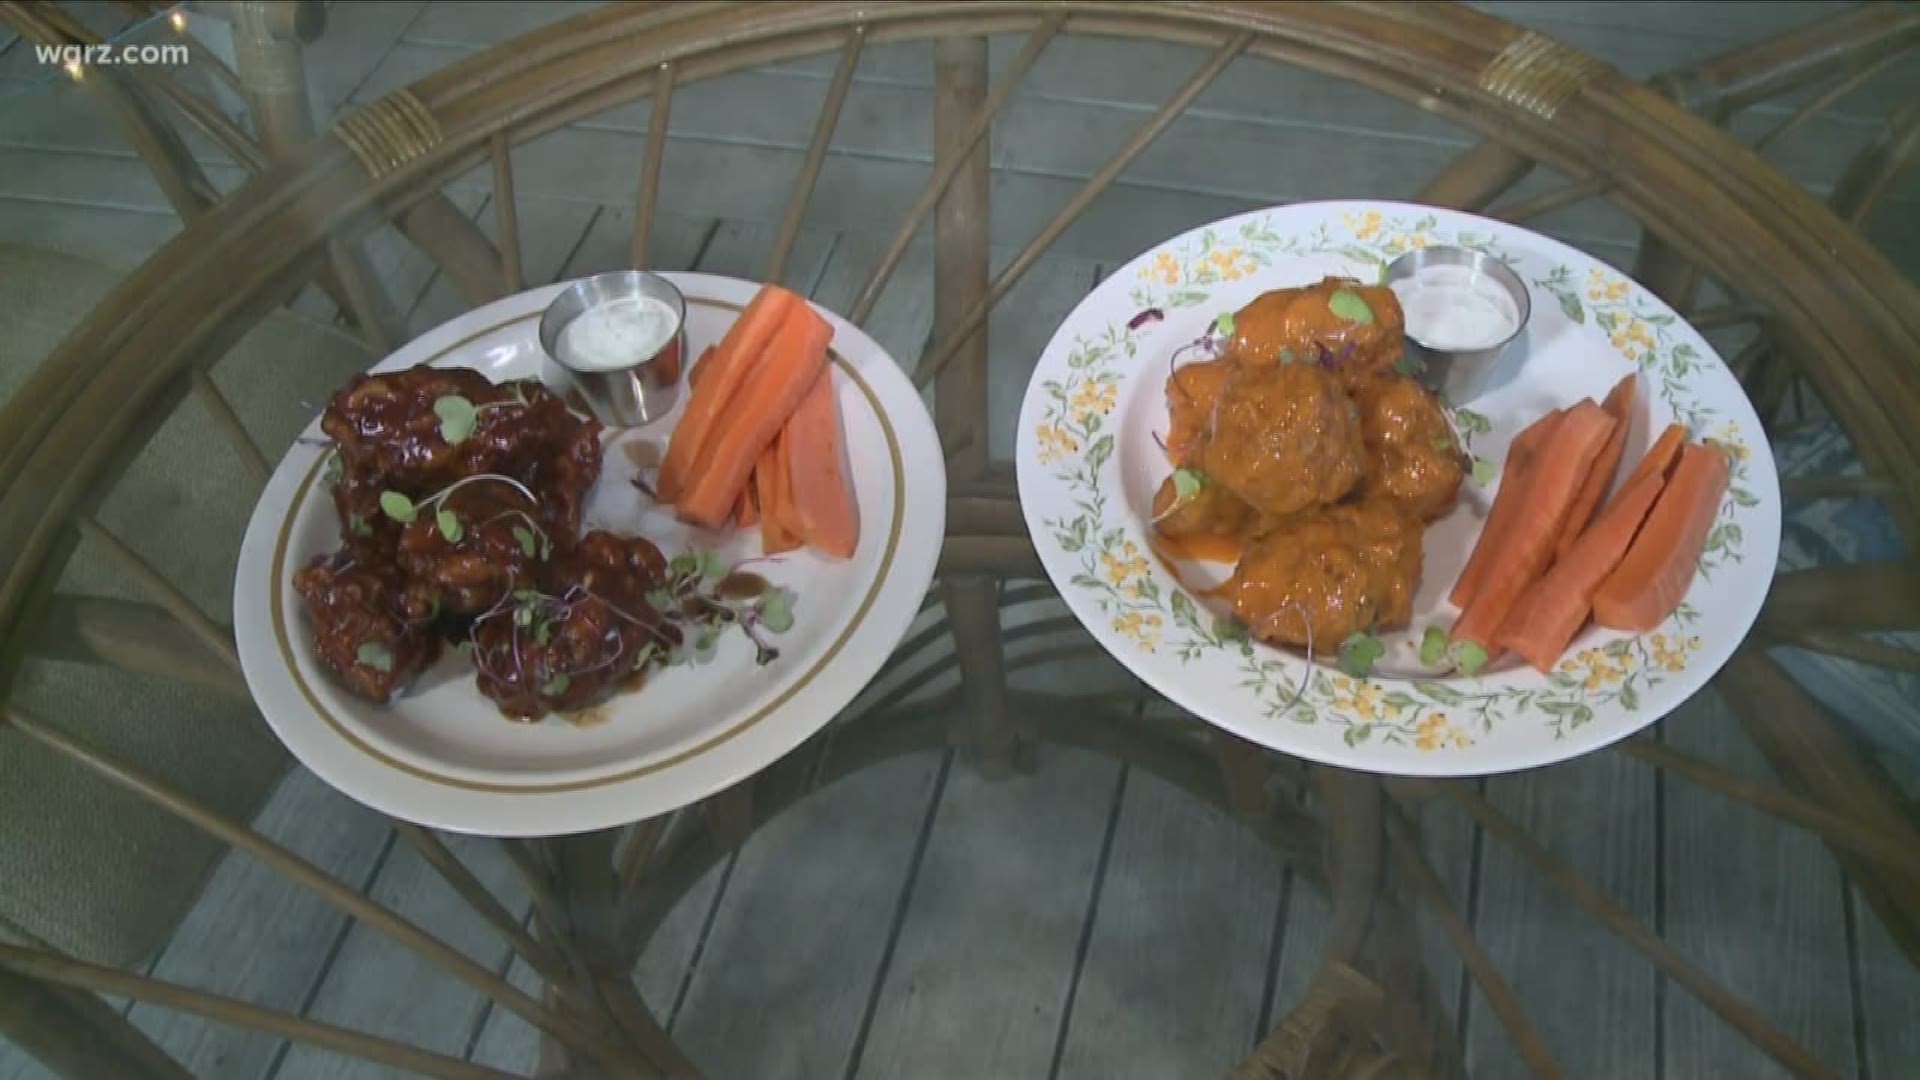 Plant-based cafe serves their take on chicken wings